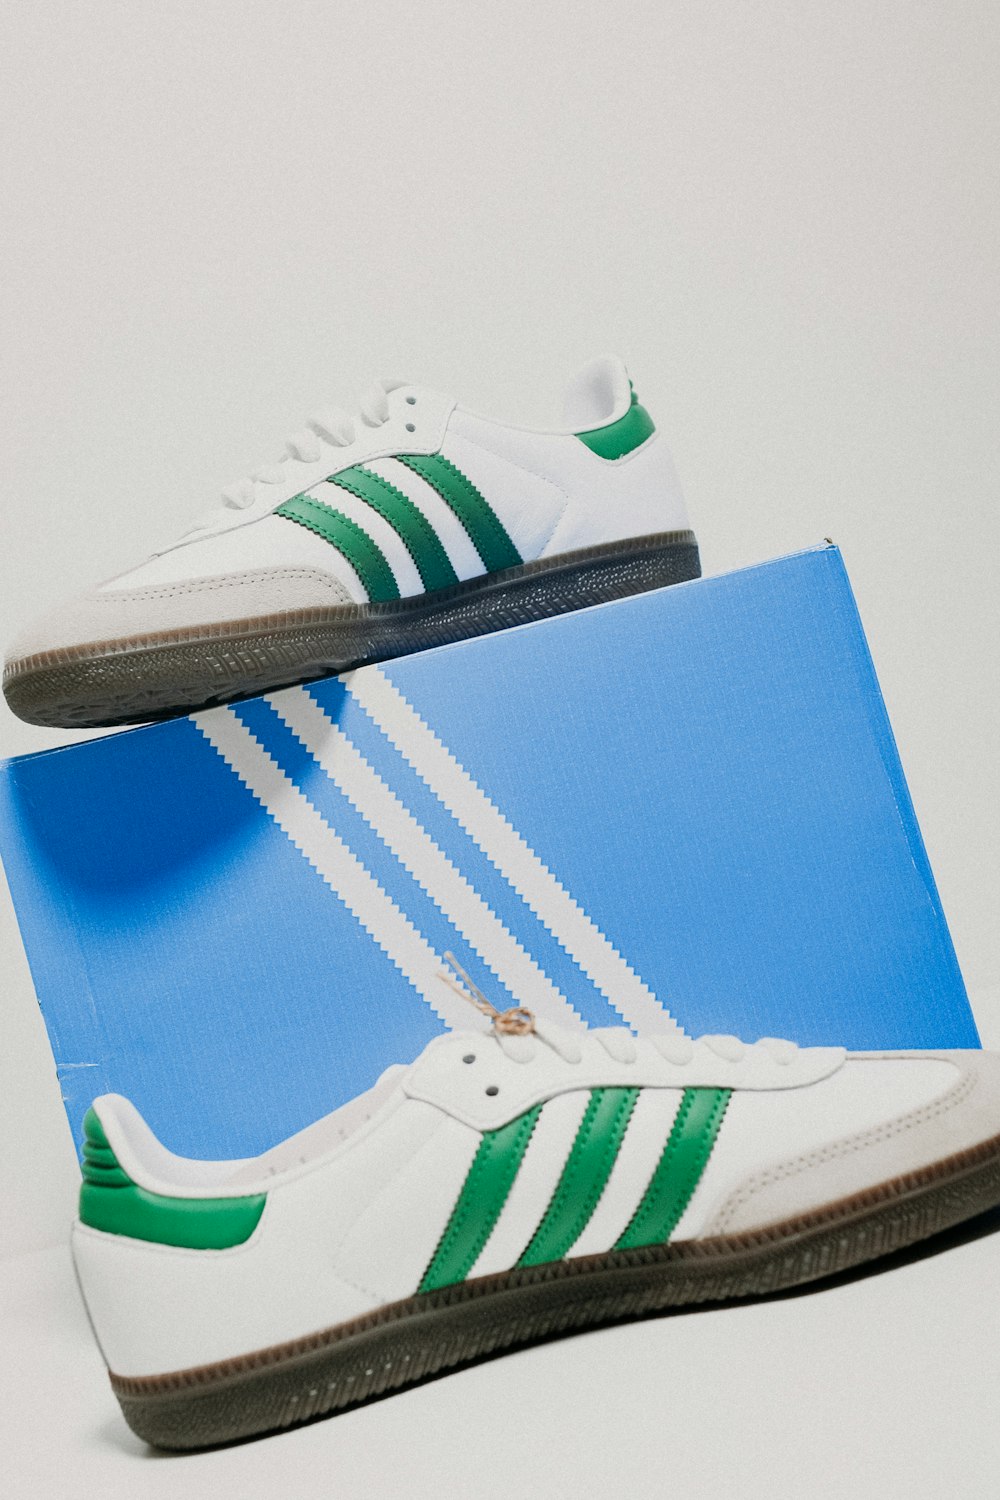 a pair of white and green adidas sneakers